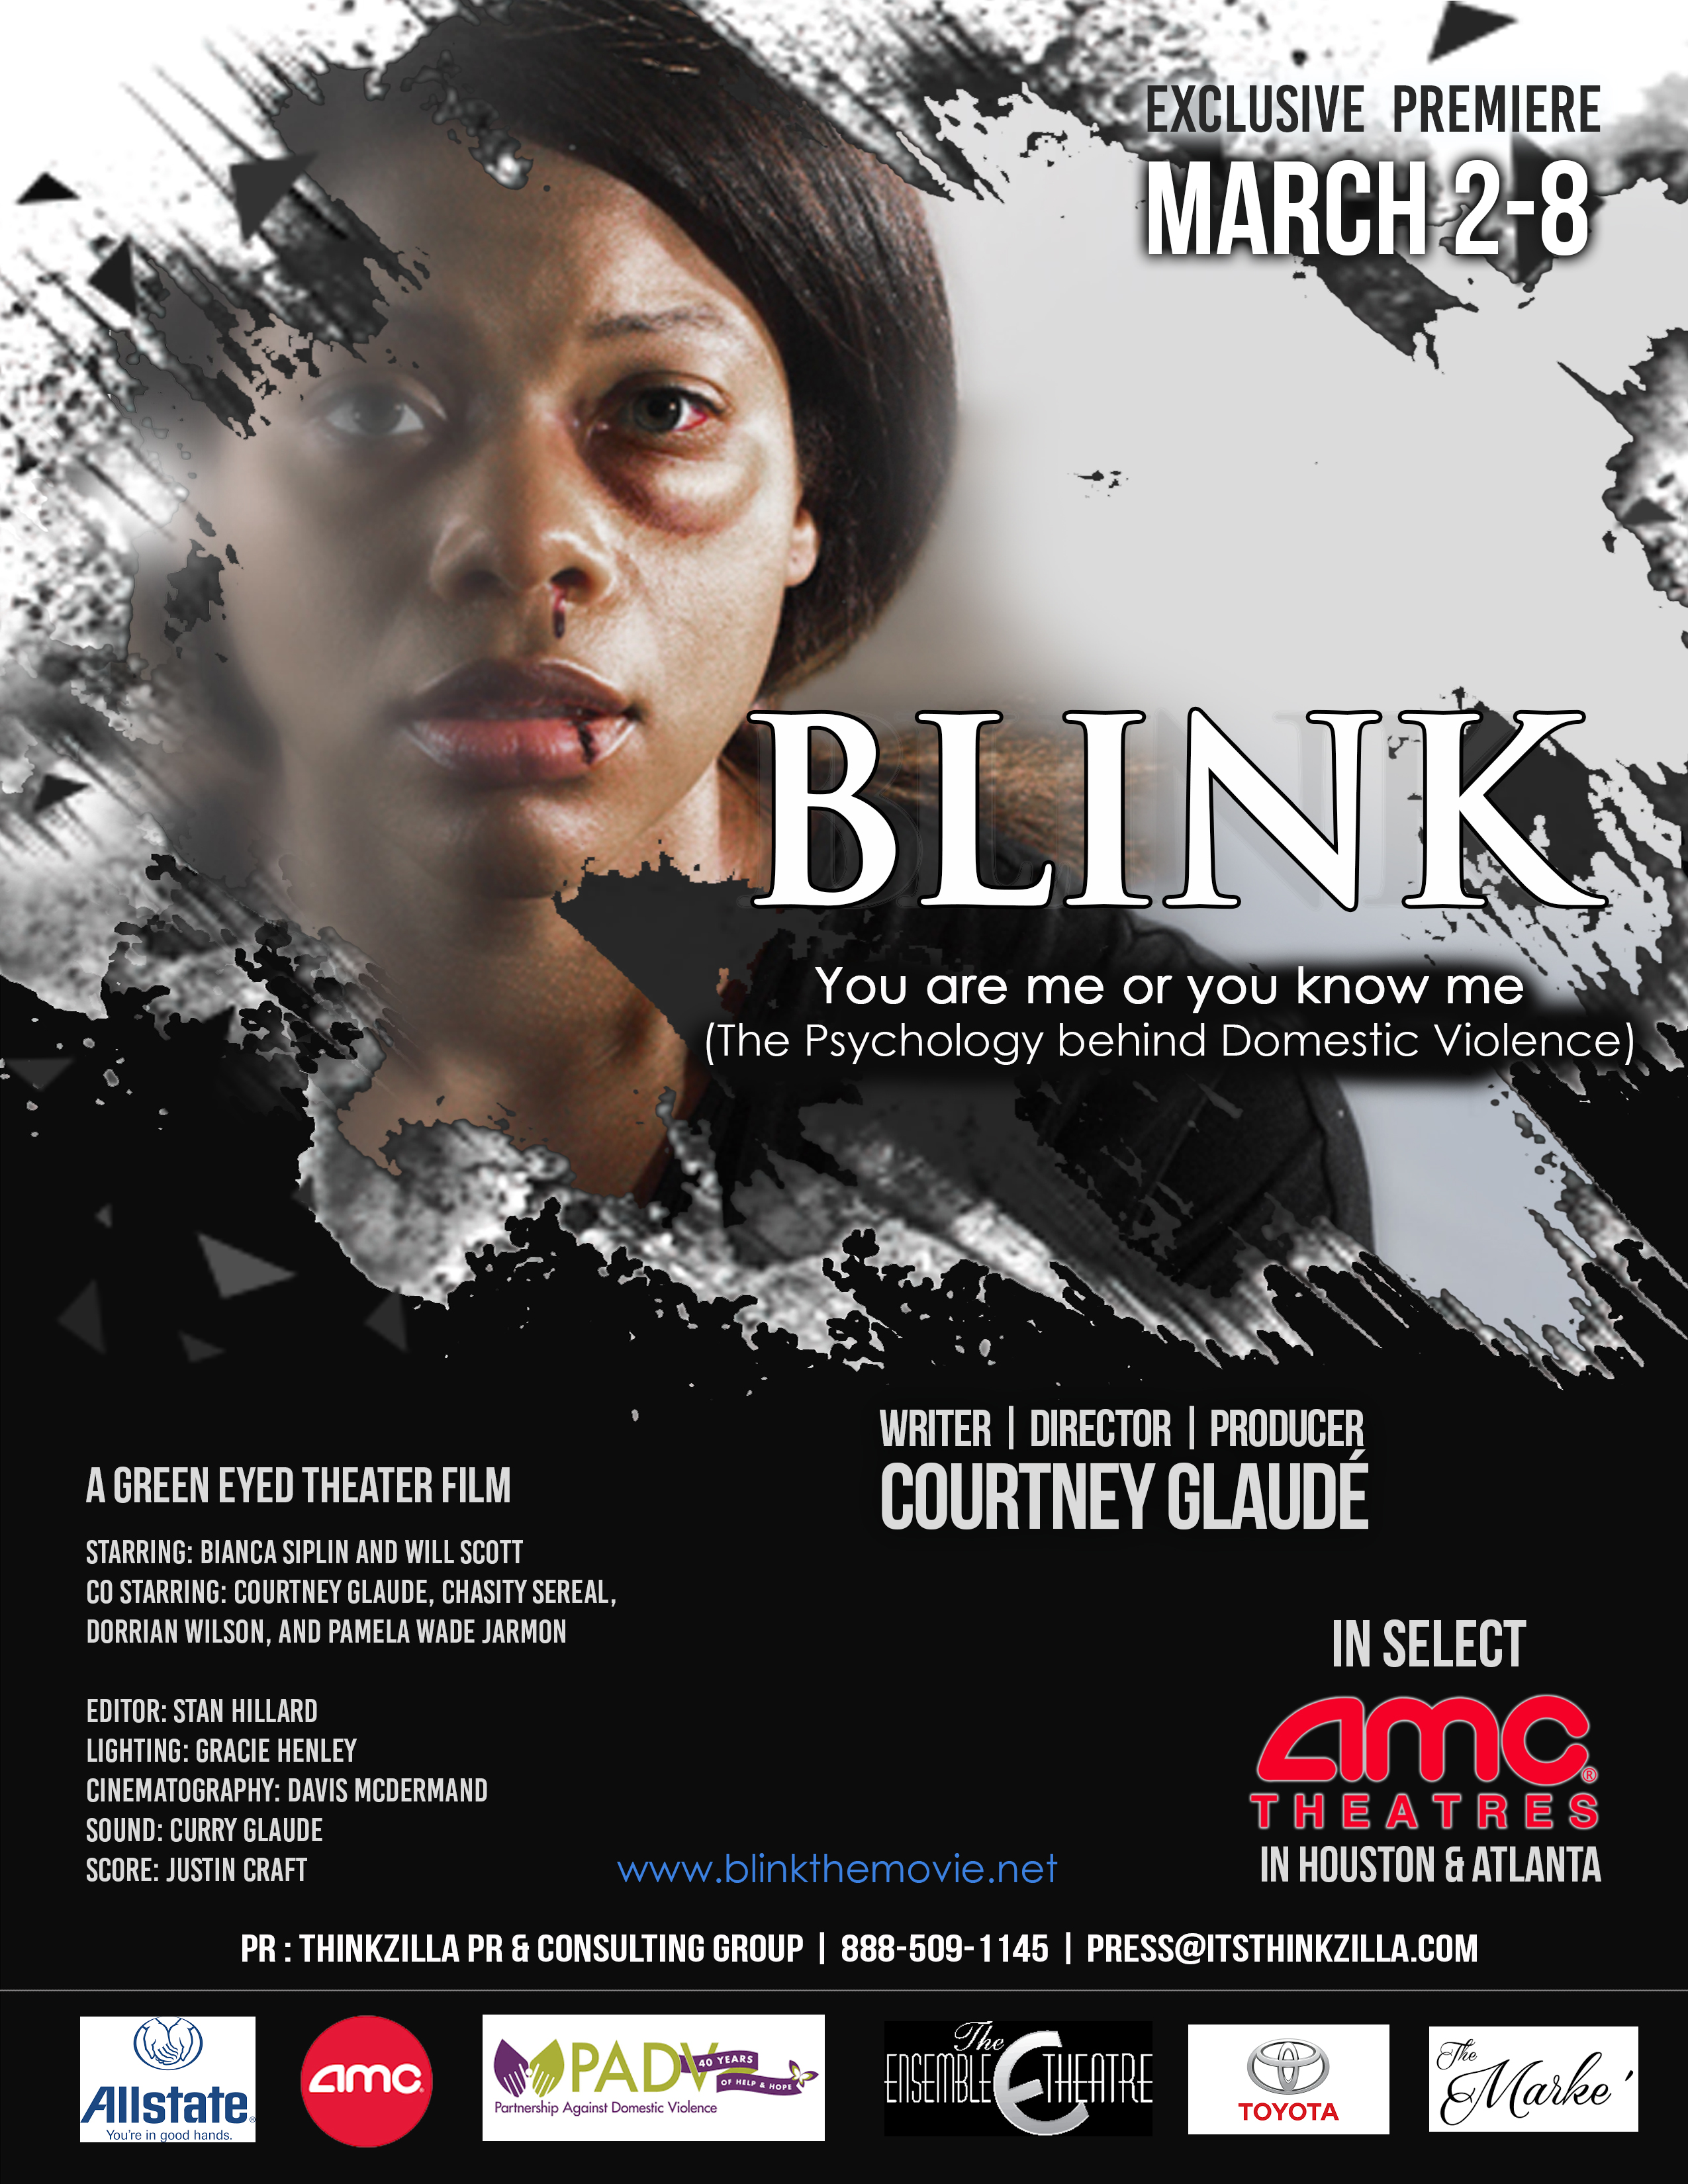 BLINK THE MOVIE